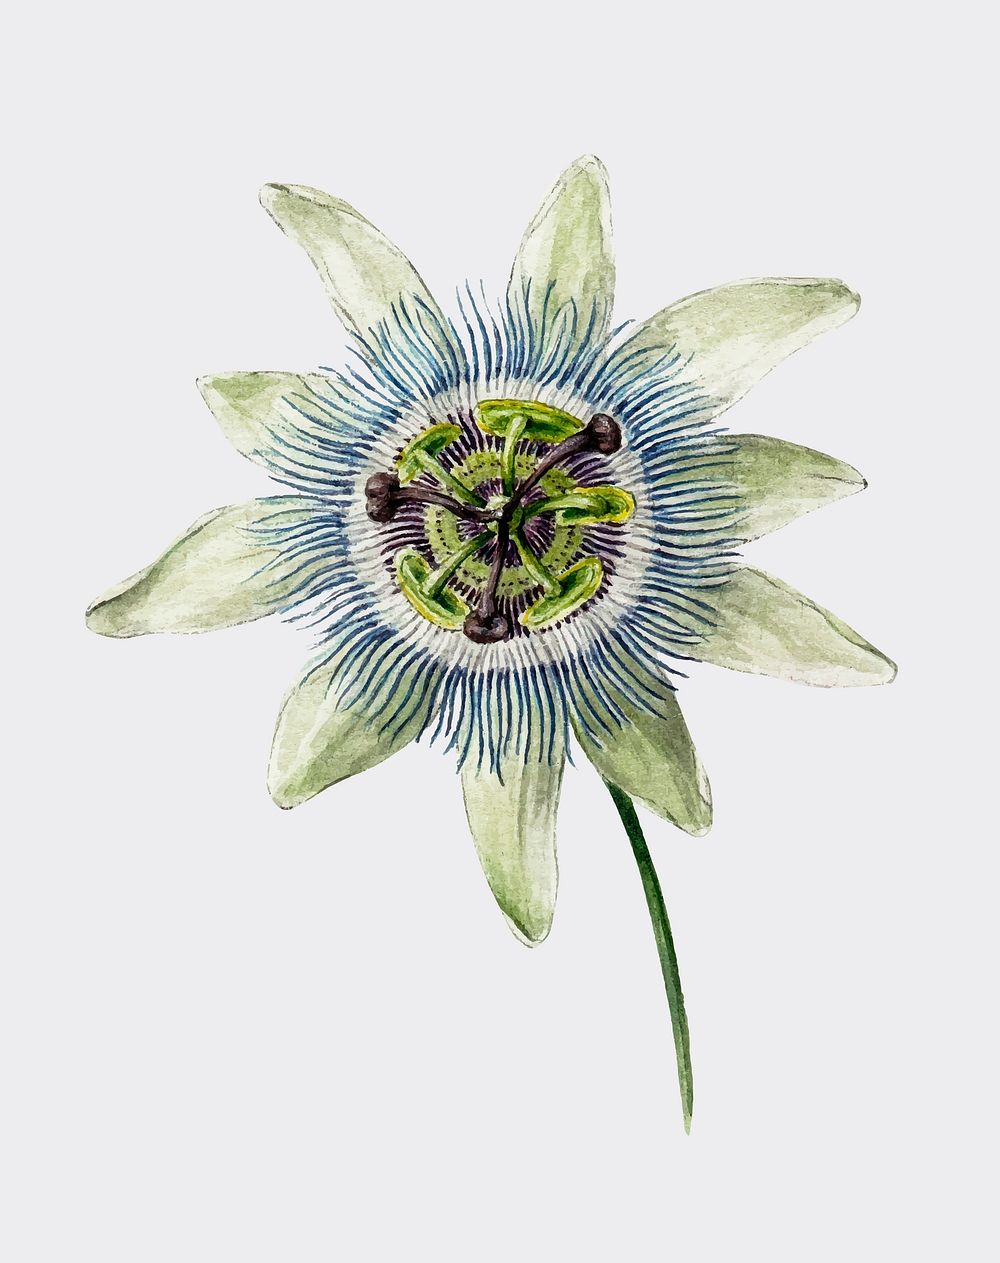 Passion Flower (1825) by Jean Bernard (1775-1883). Original from the Rijks Museum. Digitally enhanced by rawpixel.